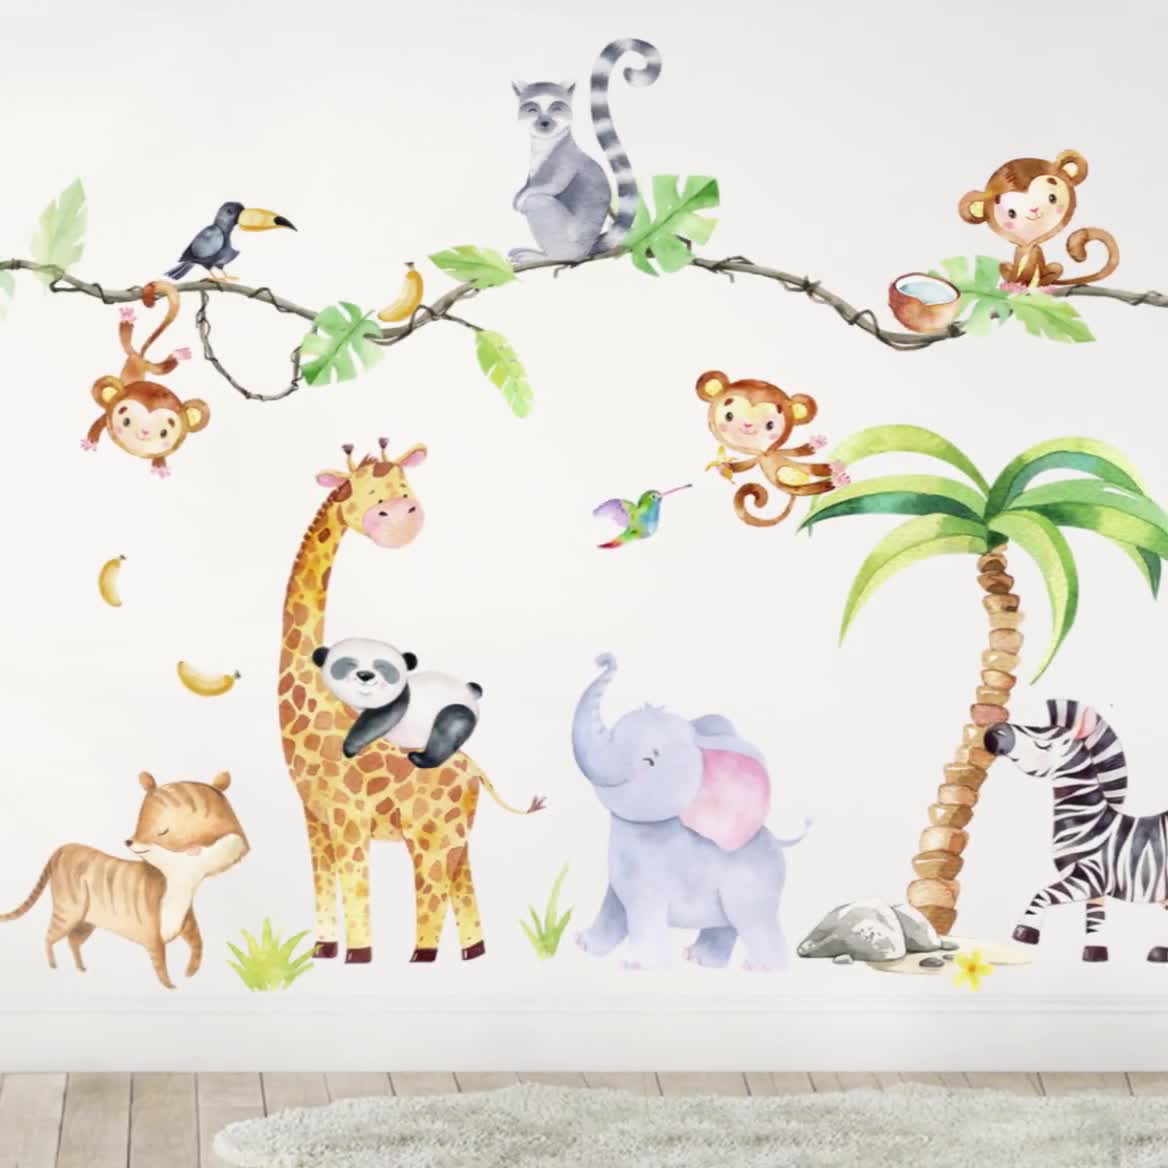 XXL Sticker Set Safari Animals Wall Decal for Nursery Jungle Wall Sticker  for Baby Room Wall Sticker Decoration Self-adhesive DL769 -  Sweden